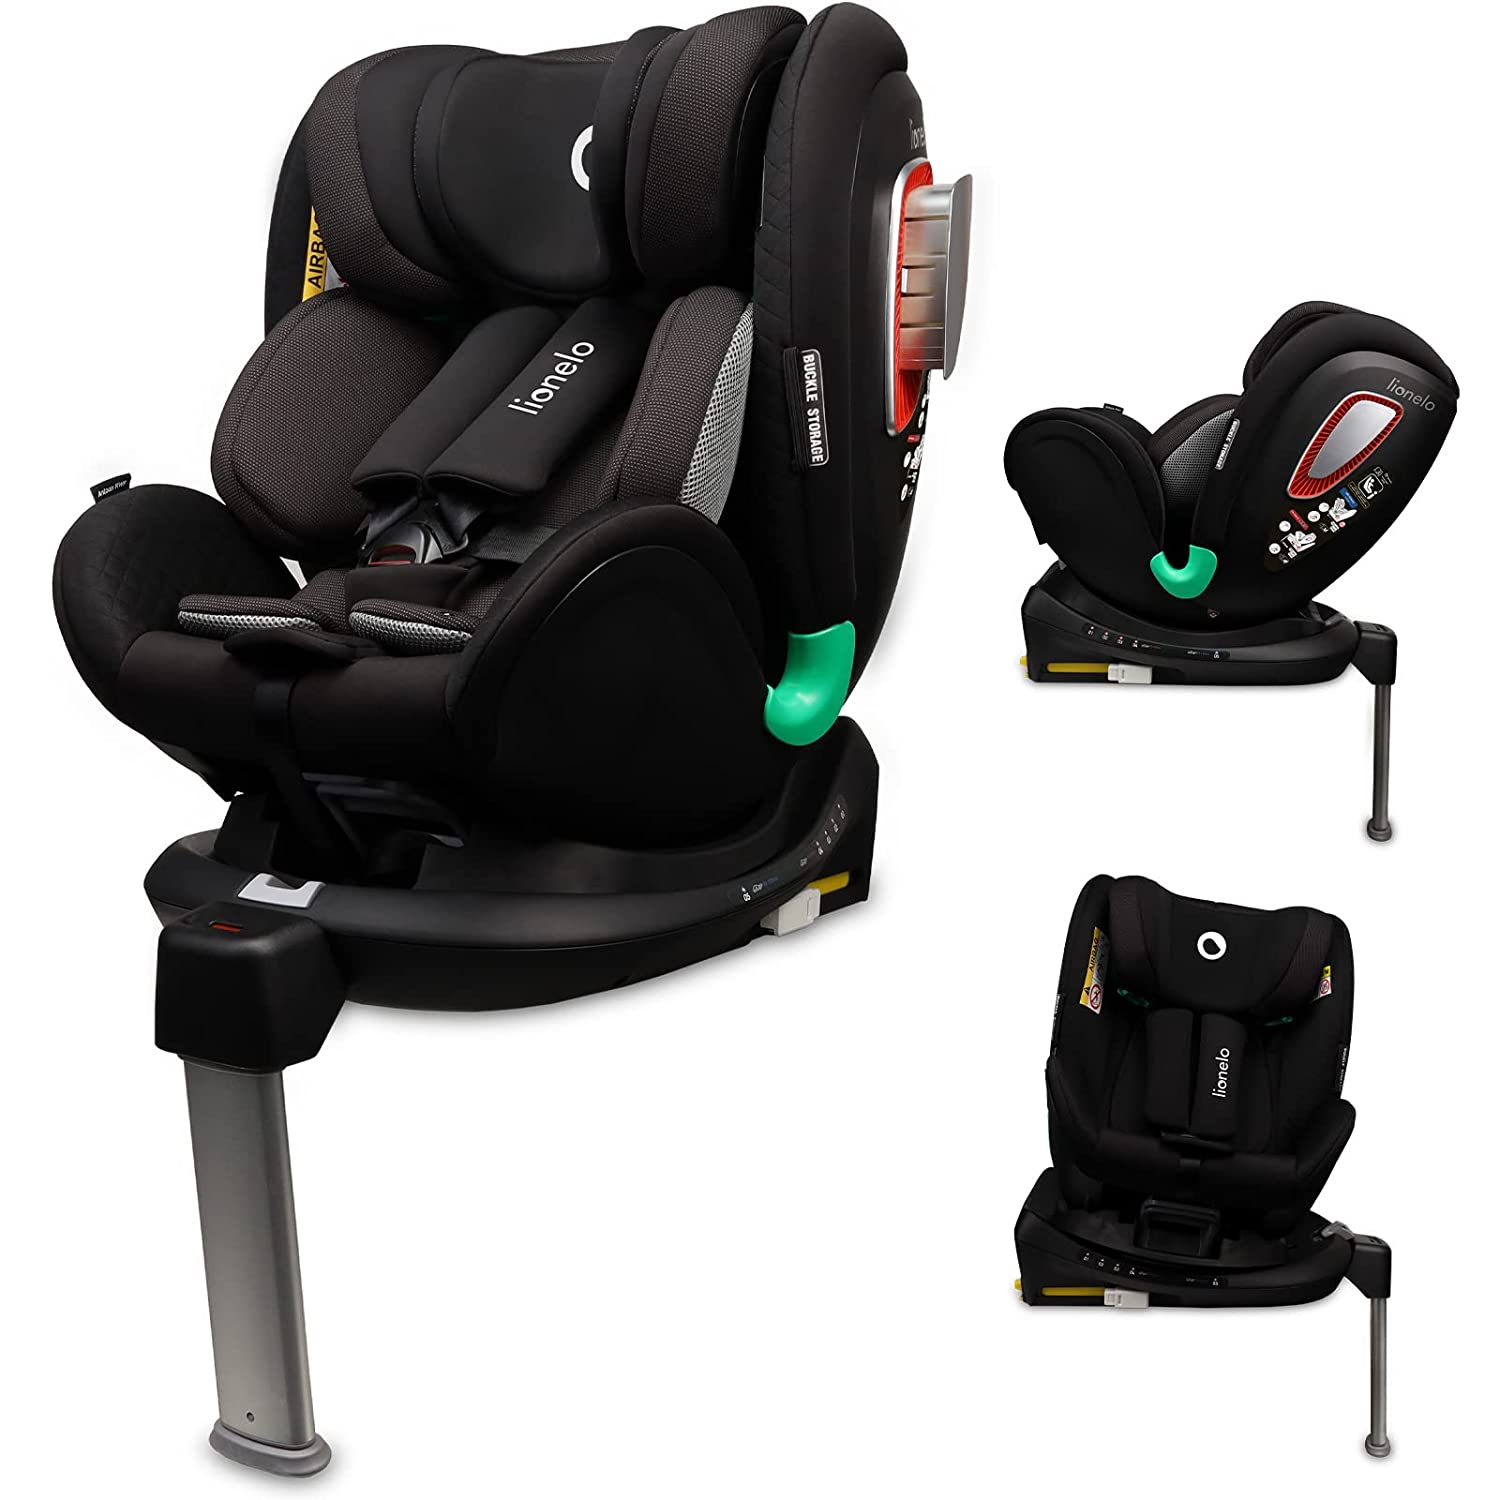 Lionelo Antoon RWF Child Seat Isofix and Support Foot Weight Group 0 to 18 kg 5 Point Harness Forward and Backward 360 Degree Rotating Base Dri-Seat Insert Hood Black